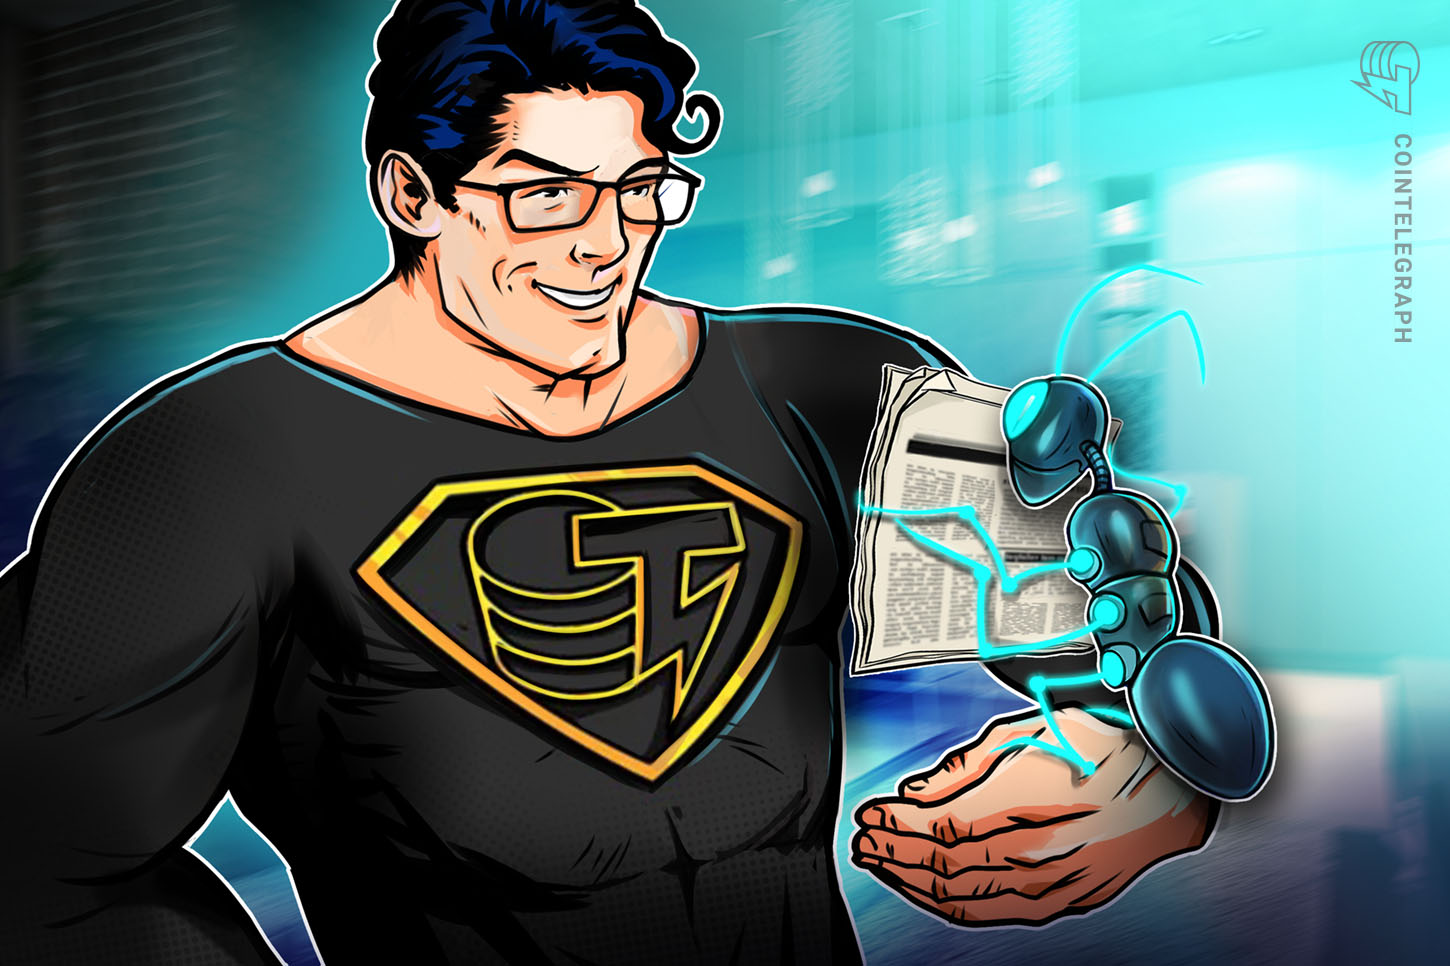 Demystify 2021 with crypto development predictions from the Cointelegraph crew